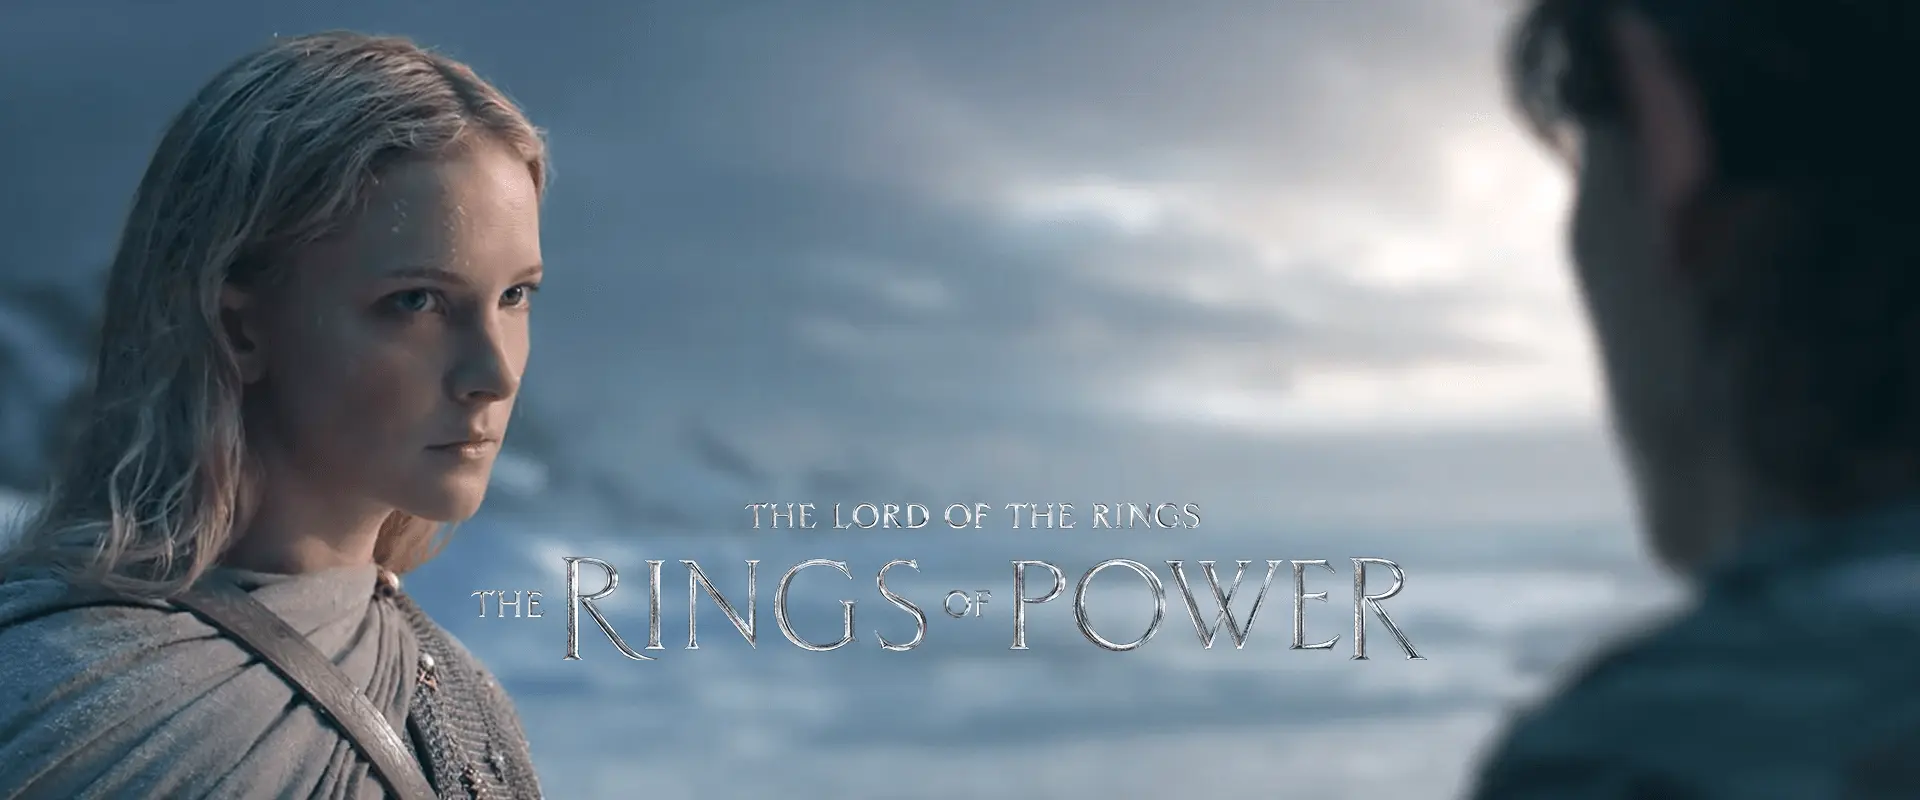 The_Lord_of_the_Rings_The_Rings_of_Power - Movie777